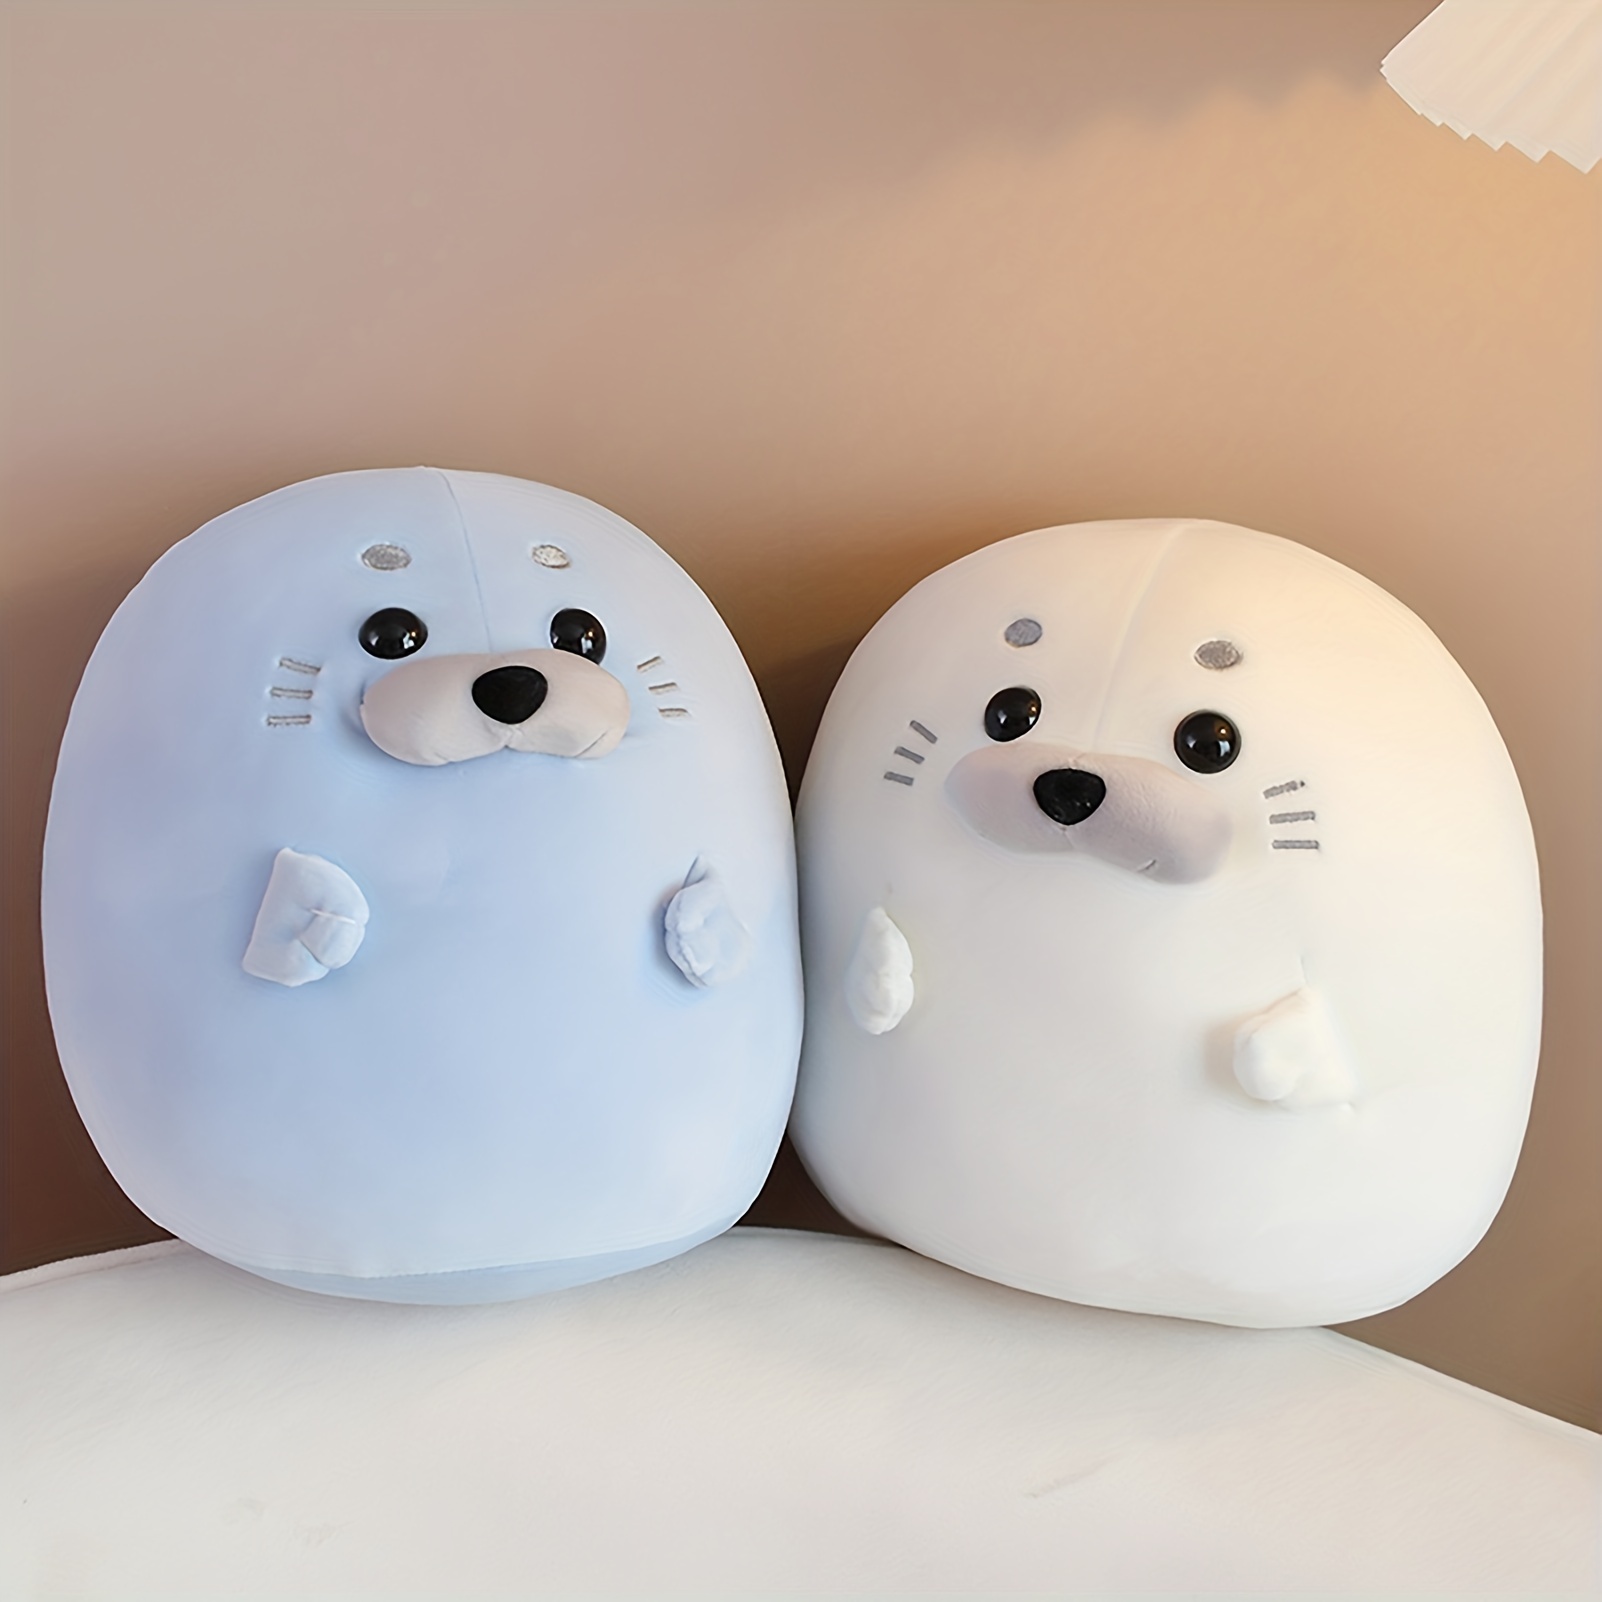 

30cm/11.81in Super Soft Seal Plush Chubby Snuggle Seal Sea Animal Plush Pillow Cuddly Gift For Kids Children Baby Girls Boys Toddlers, Creative Plush Seal Decoration